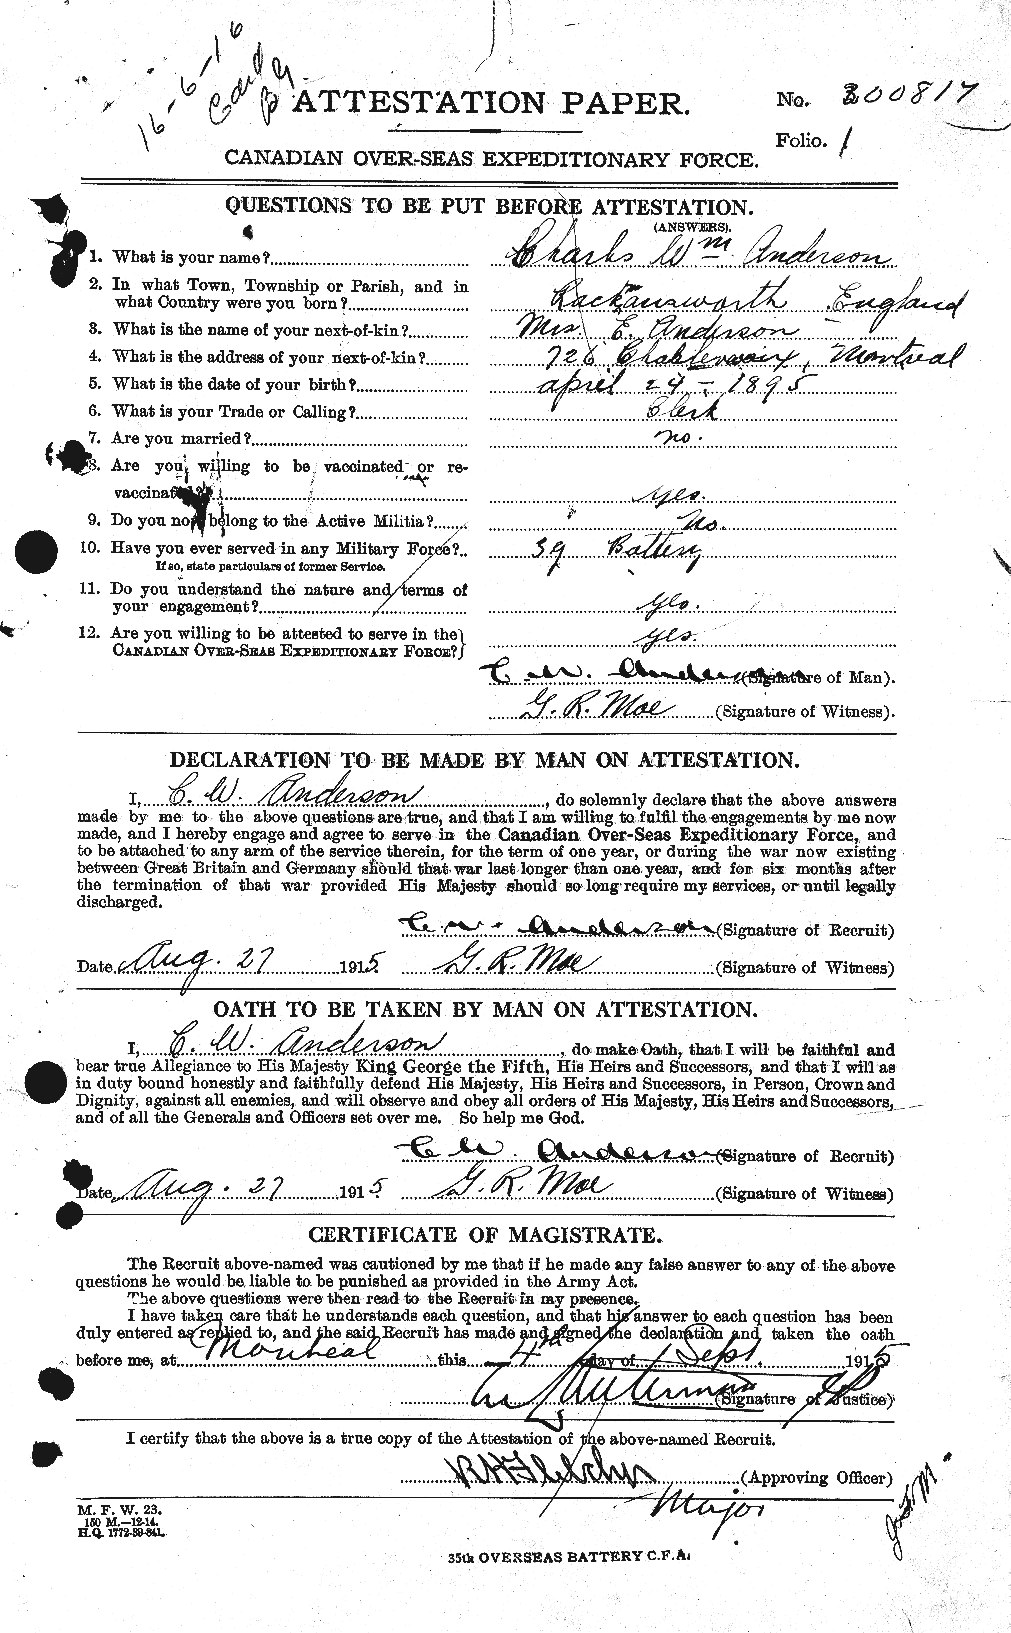 Personnel Records of the First World War - CEF 209220a